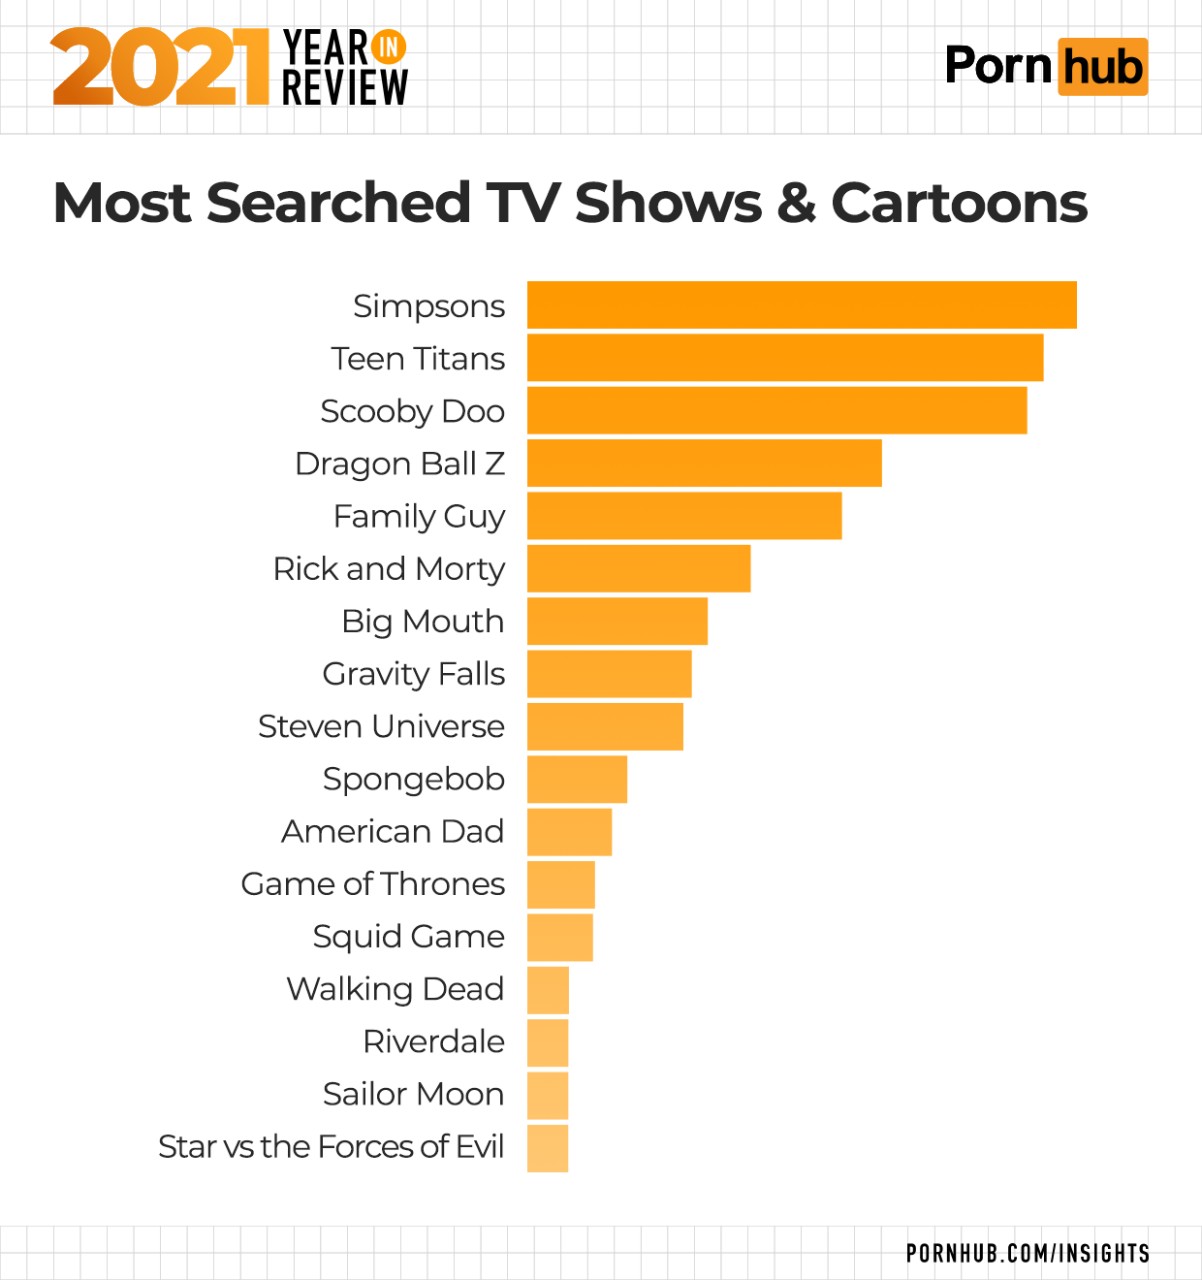 1-pornhub-insights-2021-year-in-review-tv-shows-cartoons